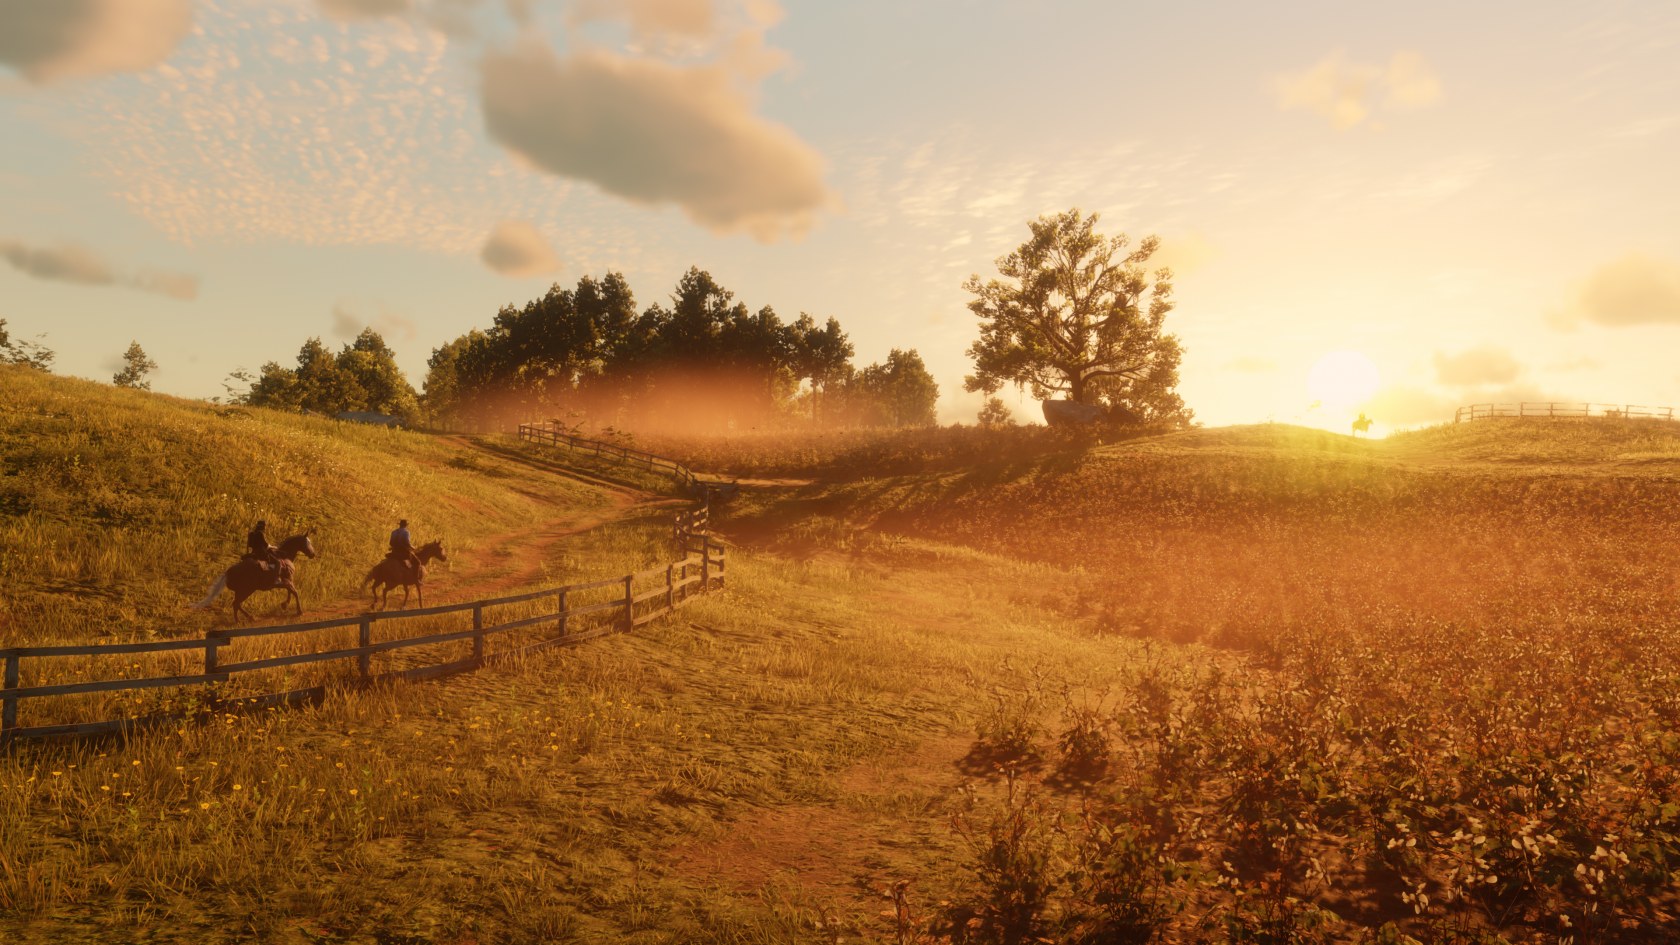 Red Dead Redemption 2's PC port will demand 150GB of storage space